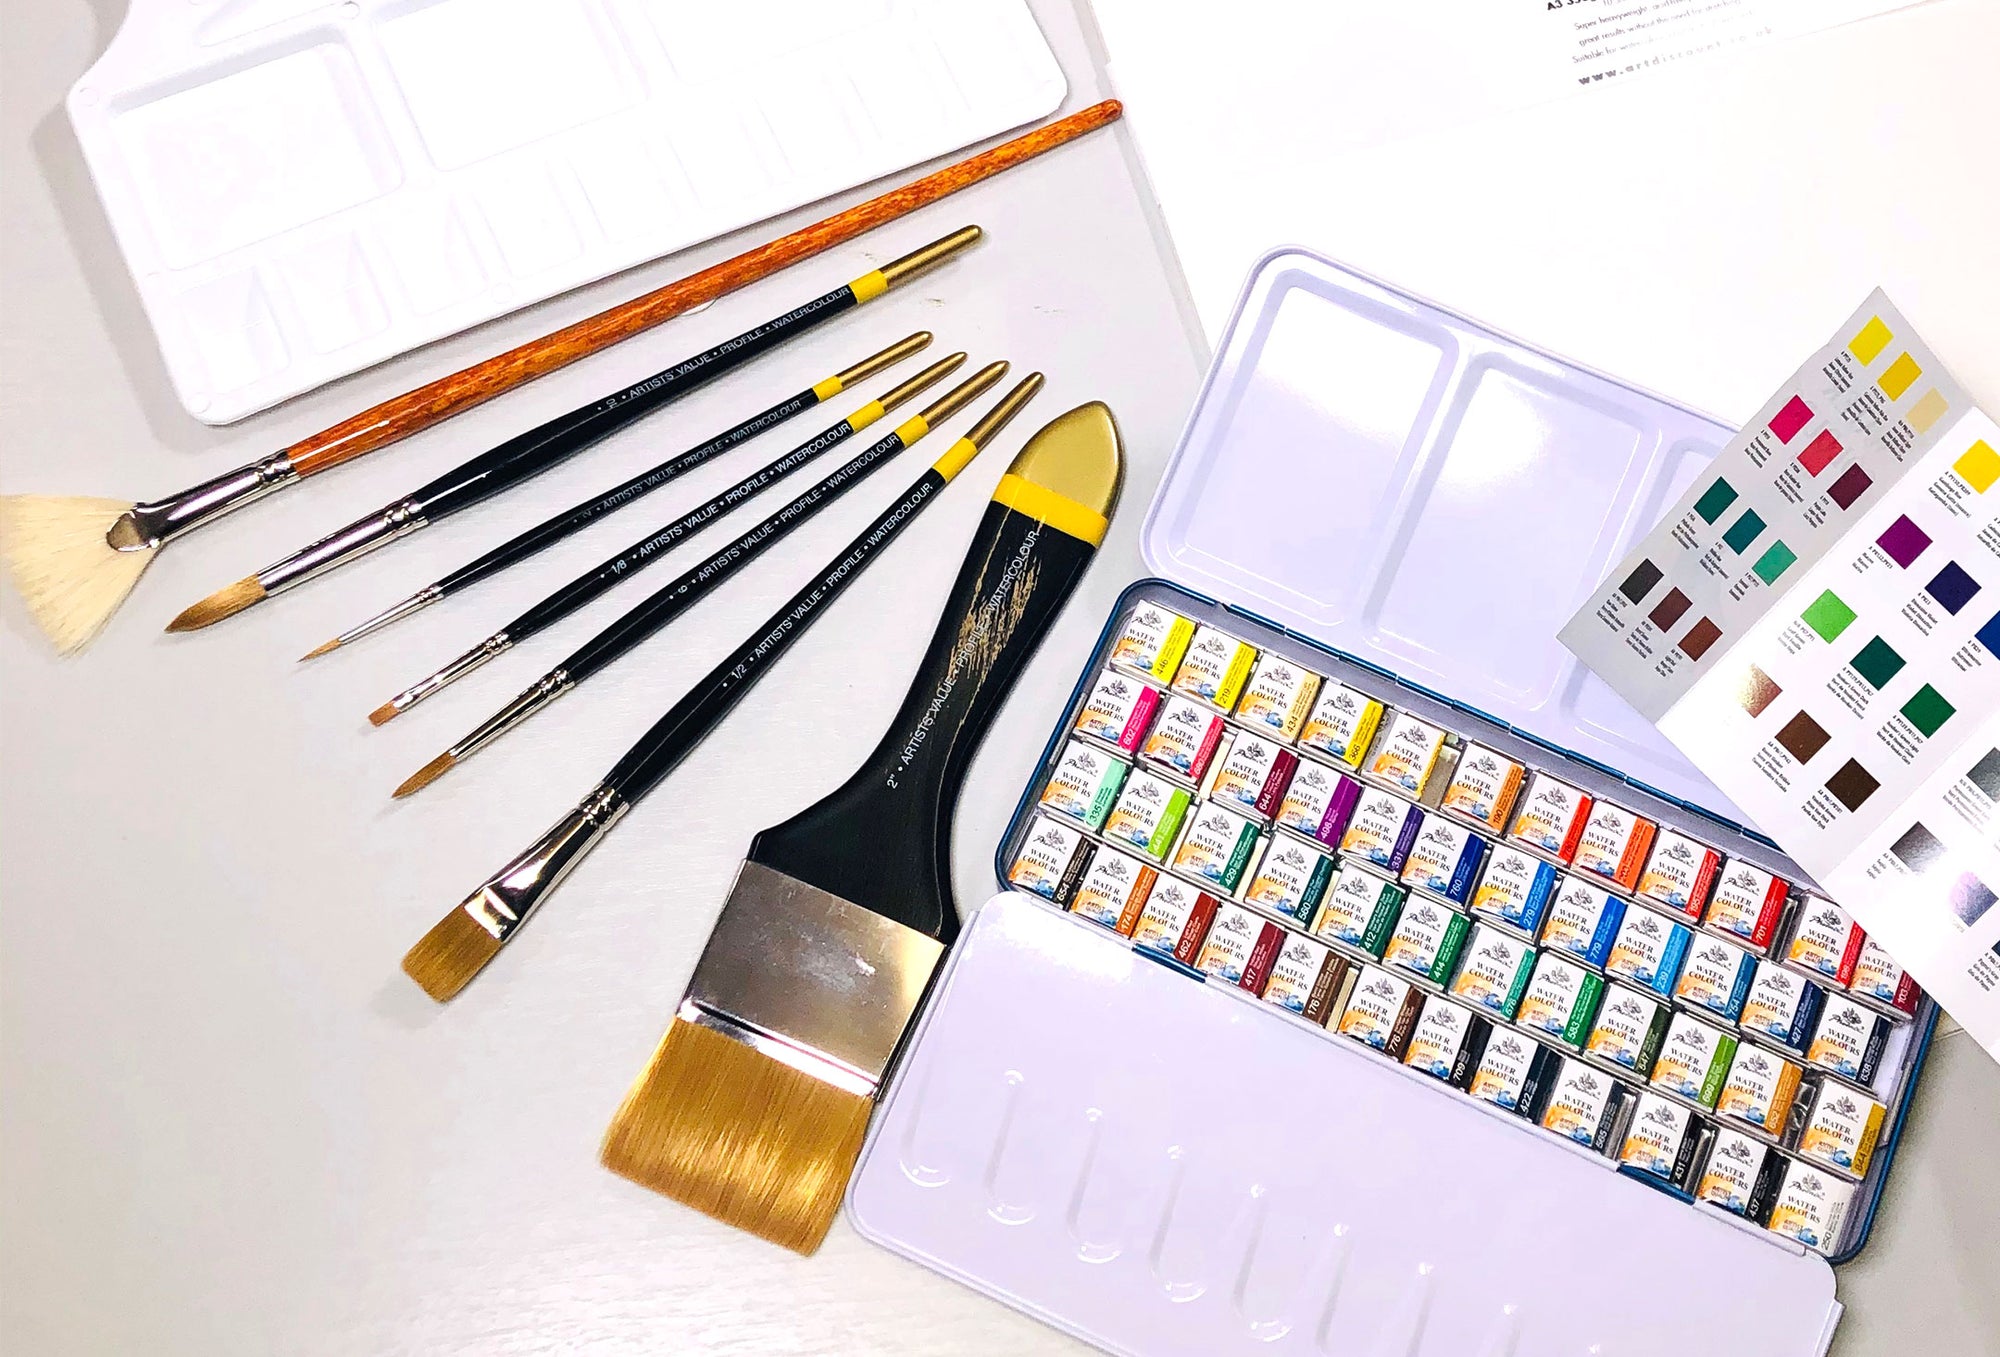 EPISODE 1 - WATERCOLOUR for Beginners - 'Creating a dilution chart'